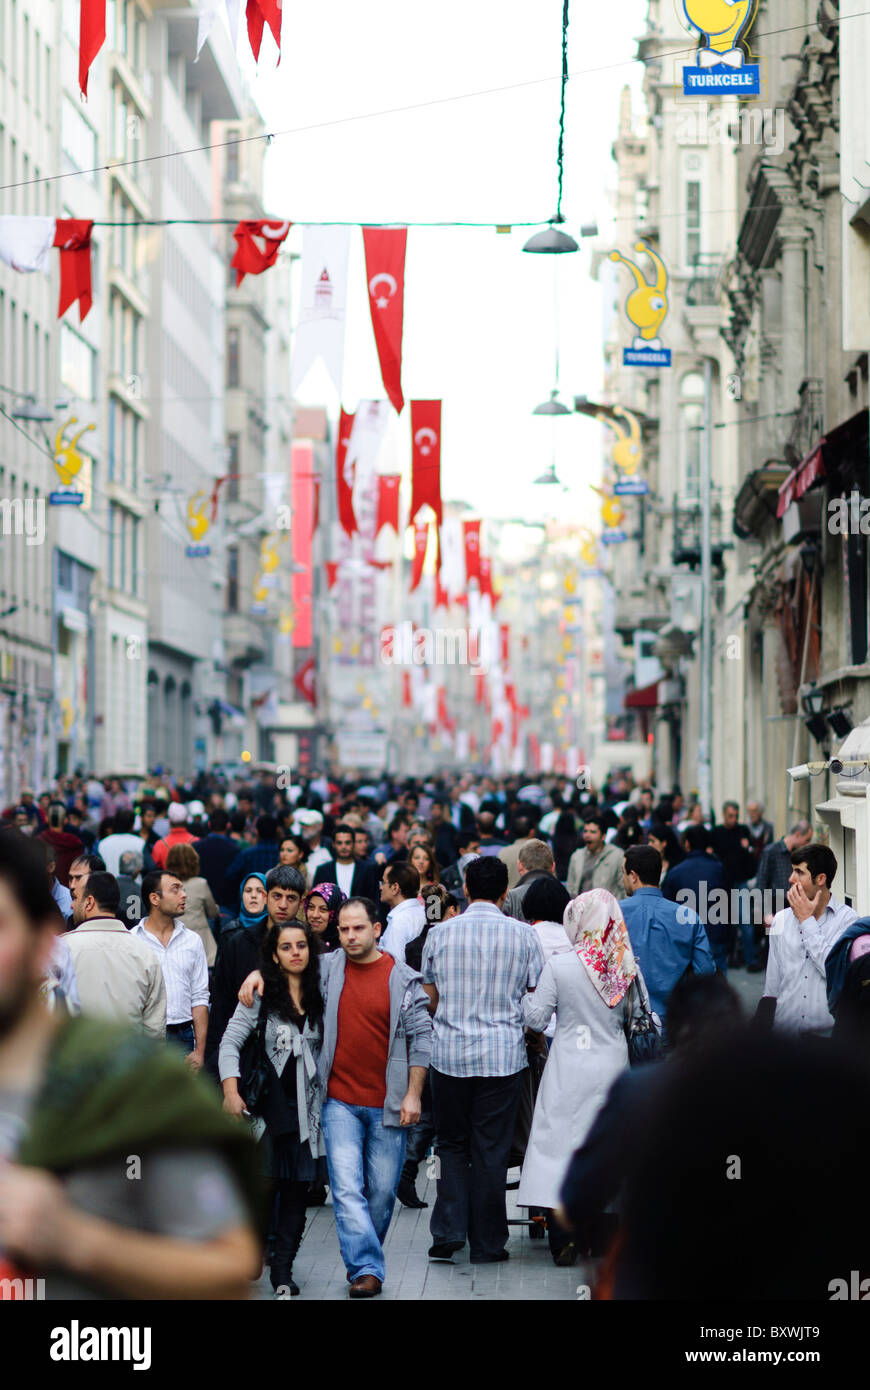 Crowds in the main shopping district of Beyoglu in Istanbul, Turkey. Stock Photo